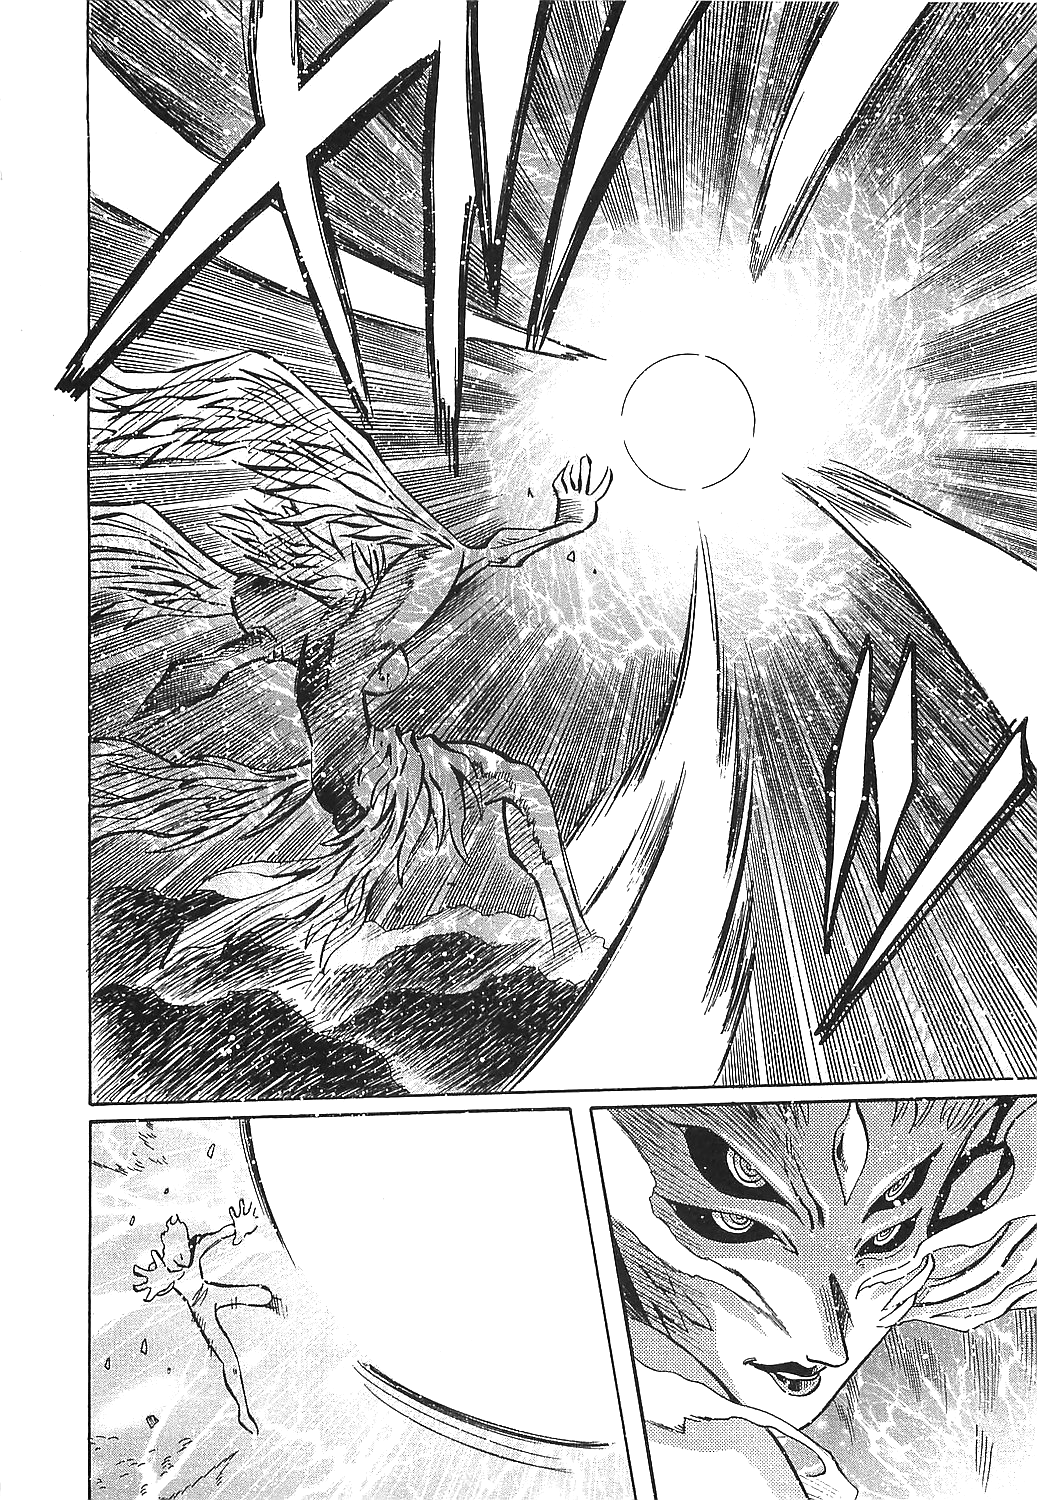 Getter Robo Hien - The Earth Suicide Vol.3 Chapter 16: The Ultimate Battle